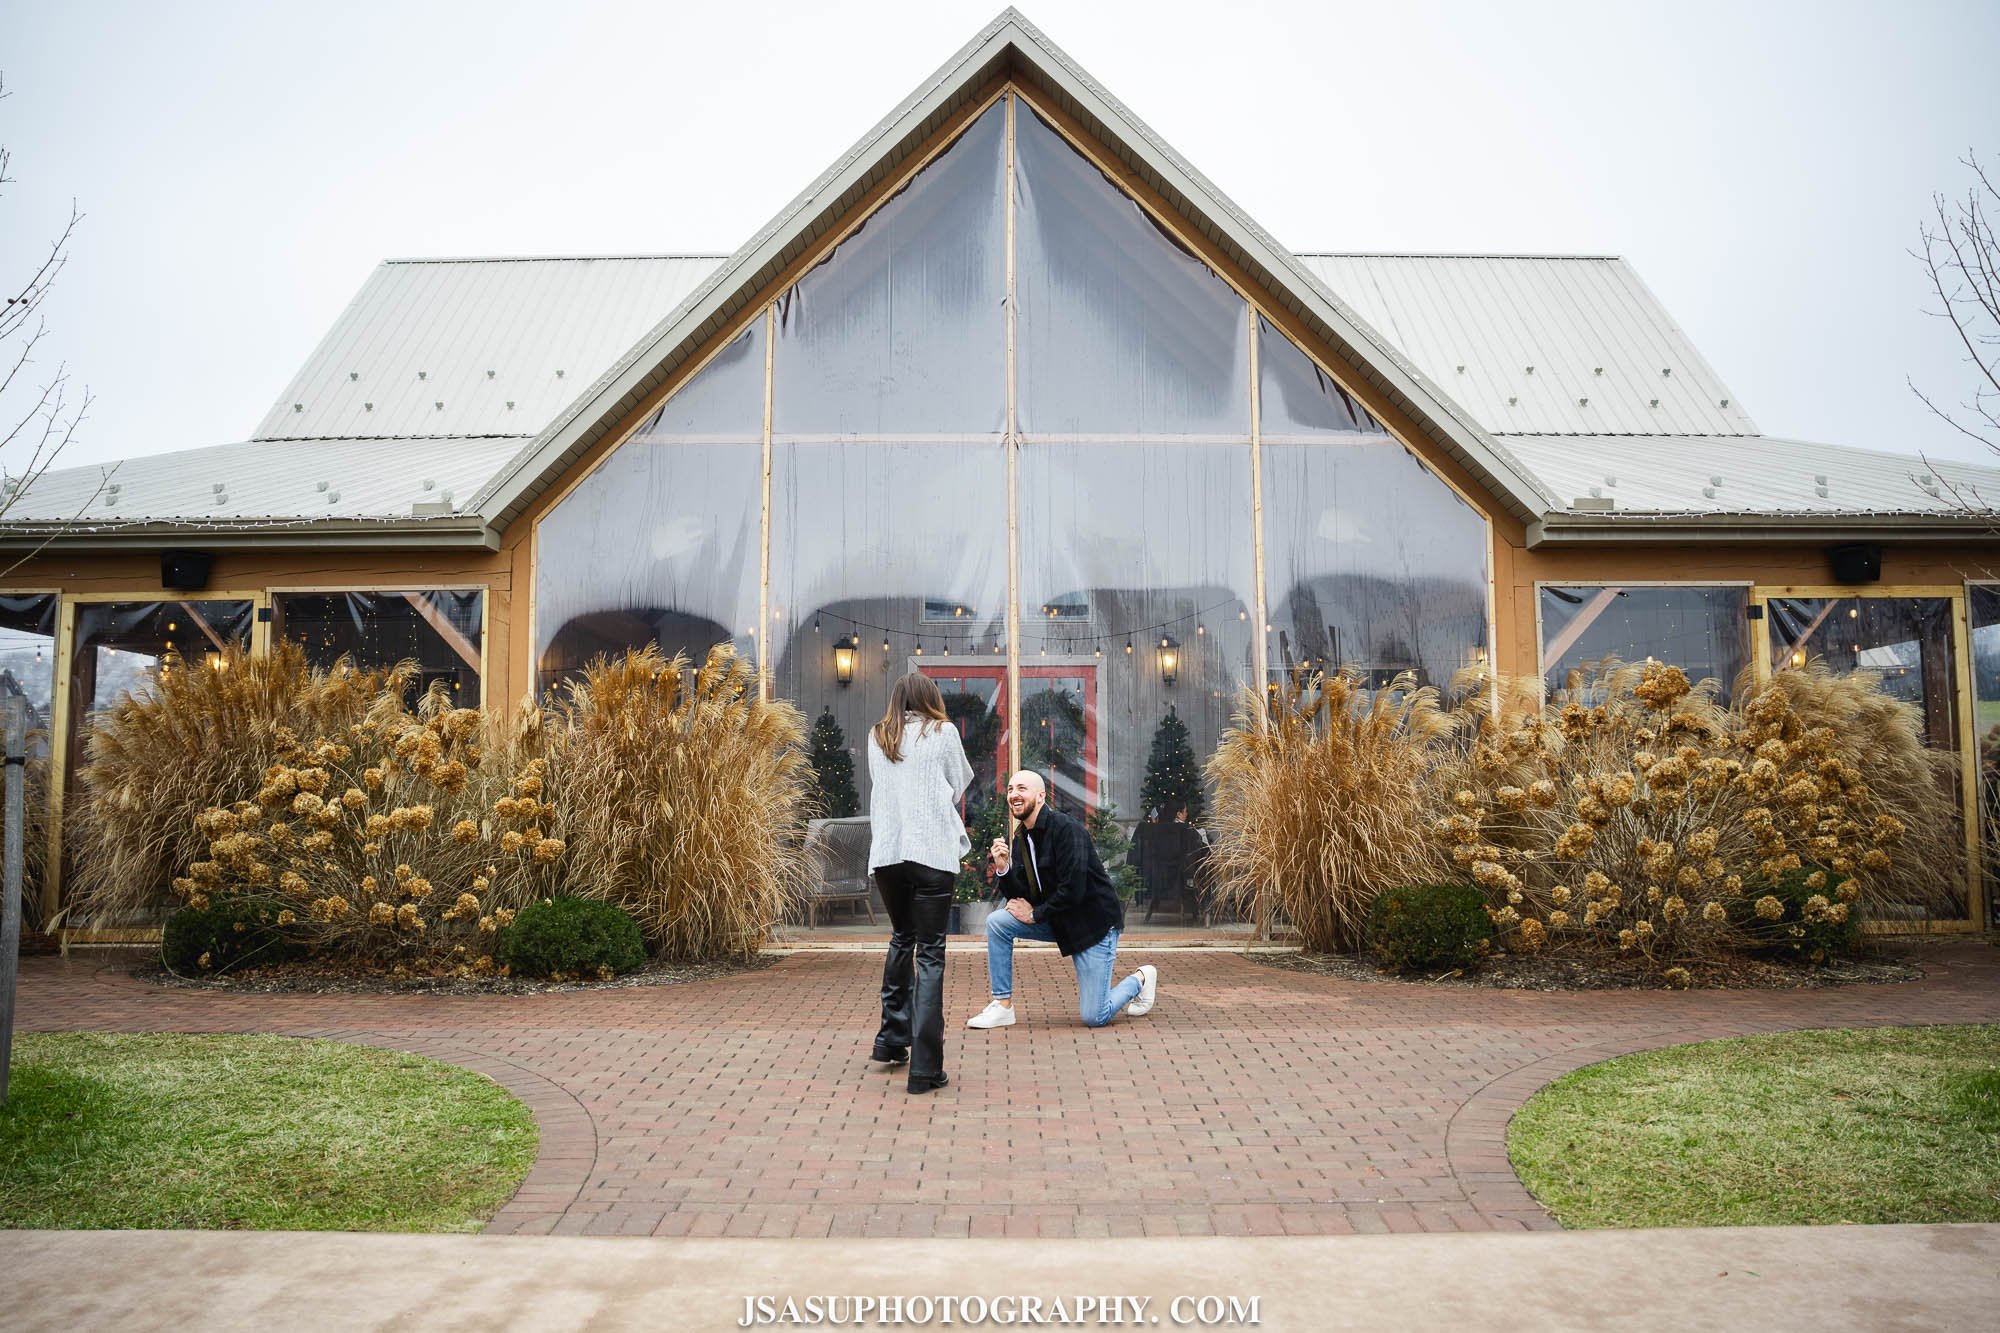 drew-alex-surprise-proposal-photos-old-westminister-winery-jsasuphotography-4.jpg